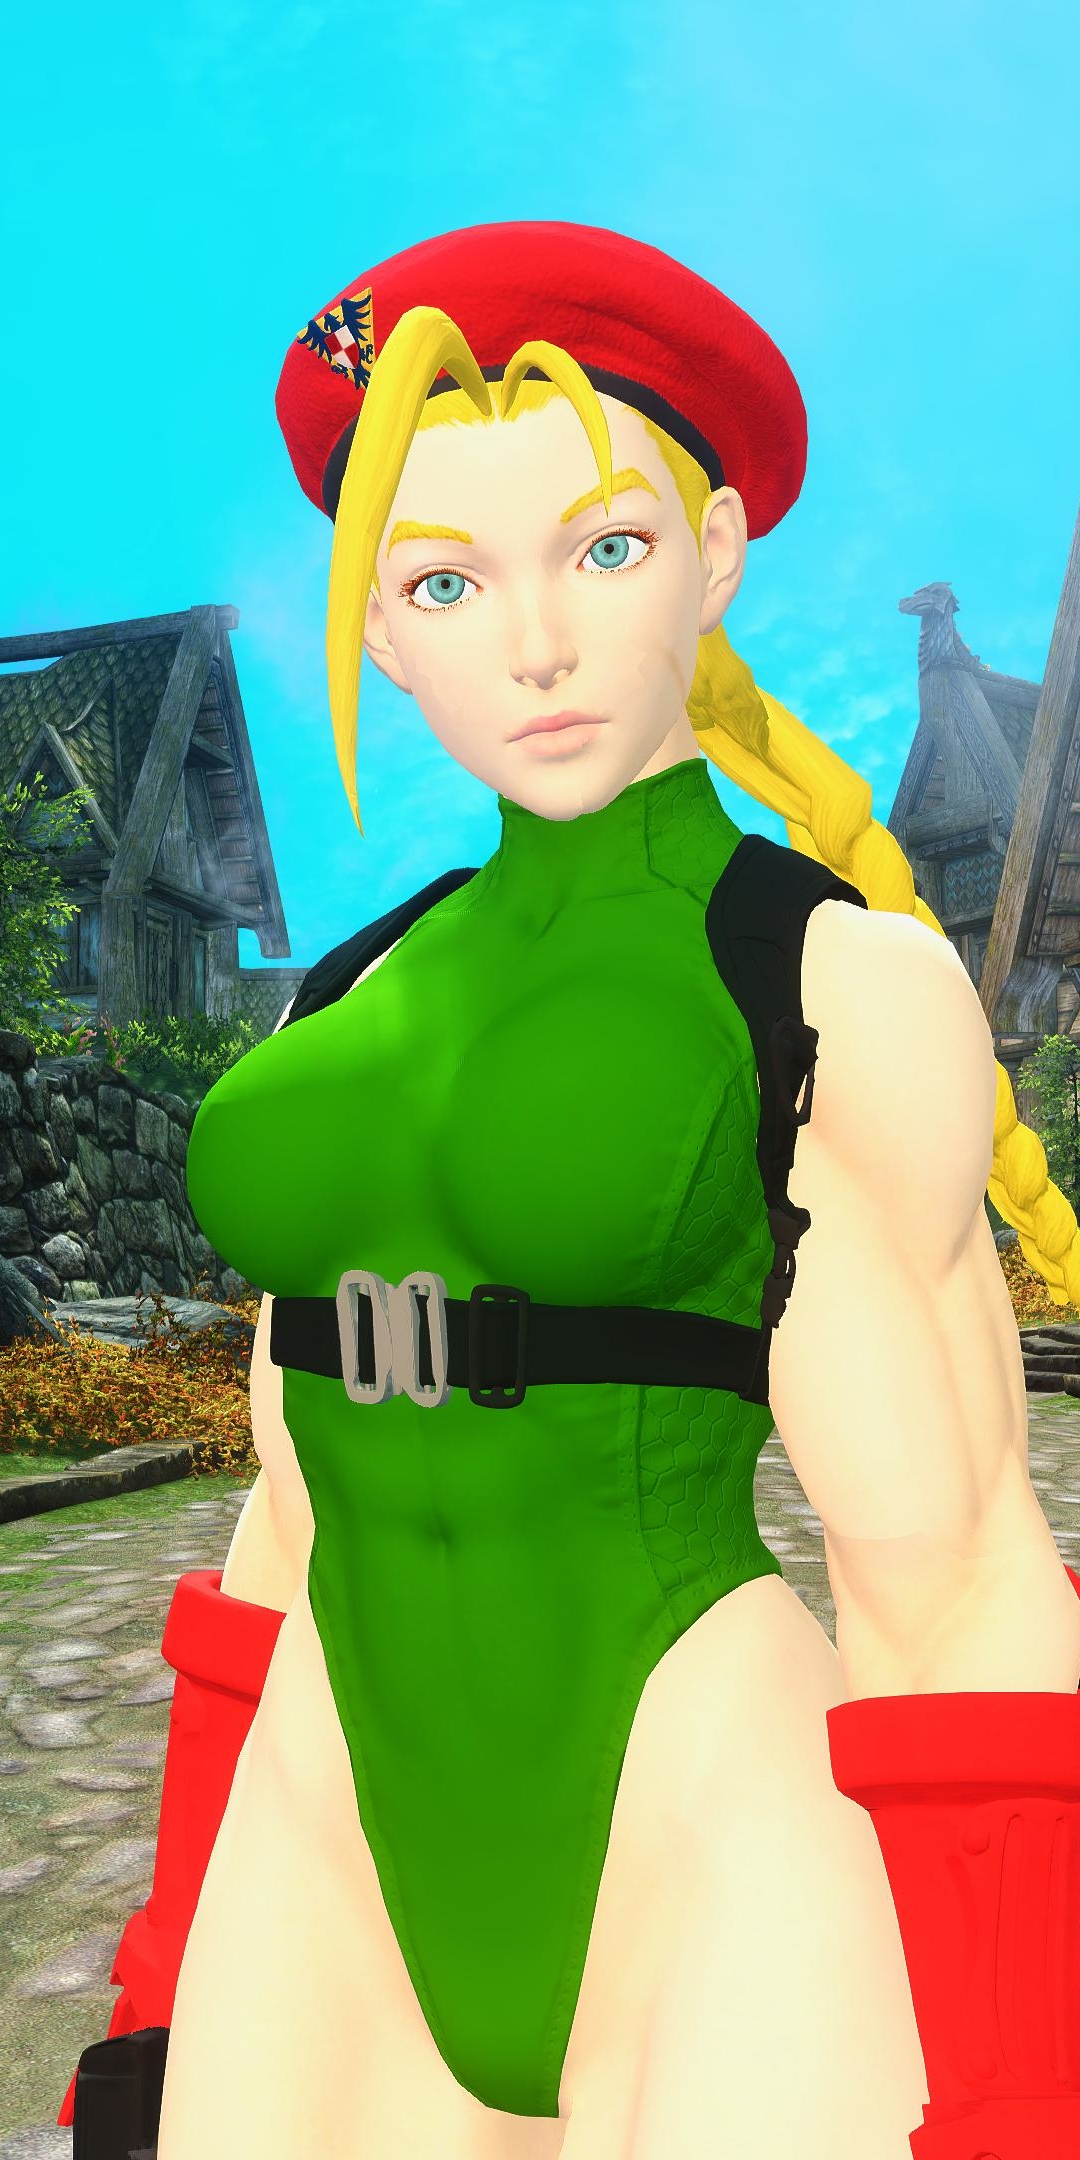 Street Fighter X Tekken Street Fighter V Cammy Tekken X Street Fighter  Street Fighter IV cammy chibi hand street Fighter IV fictional  Character png  PNGWing